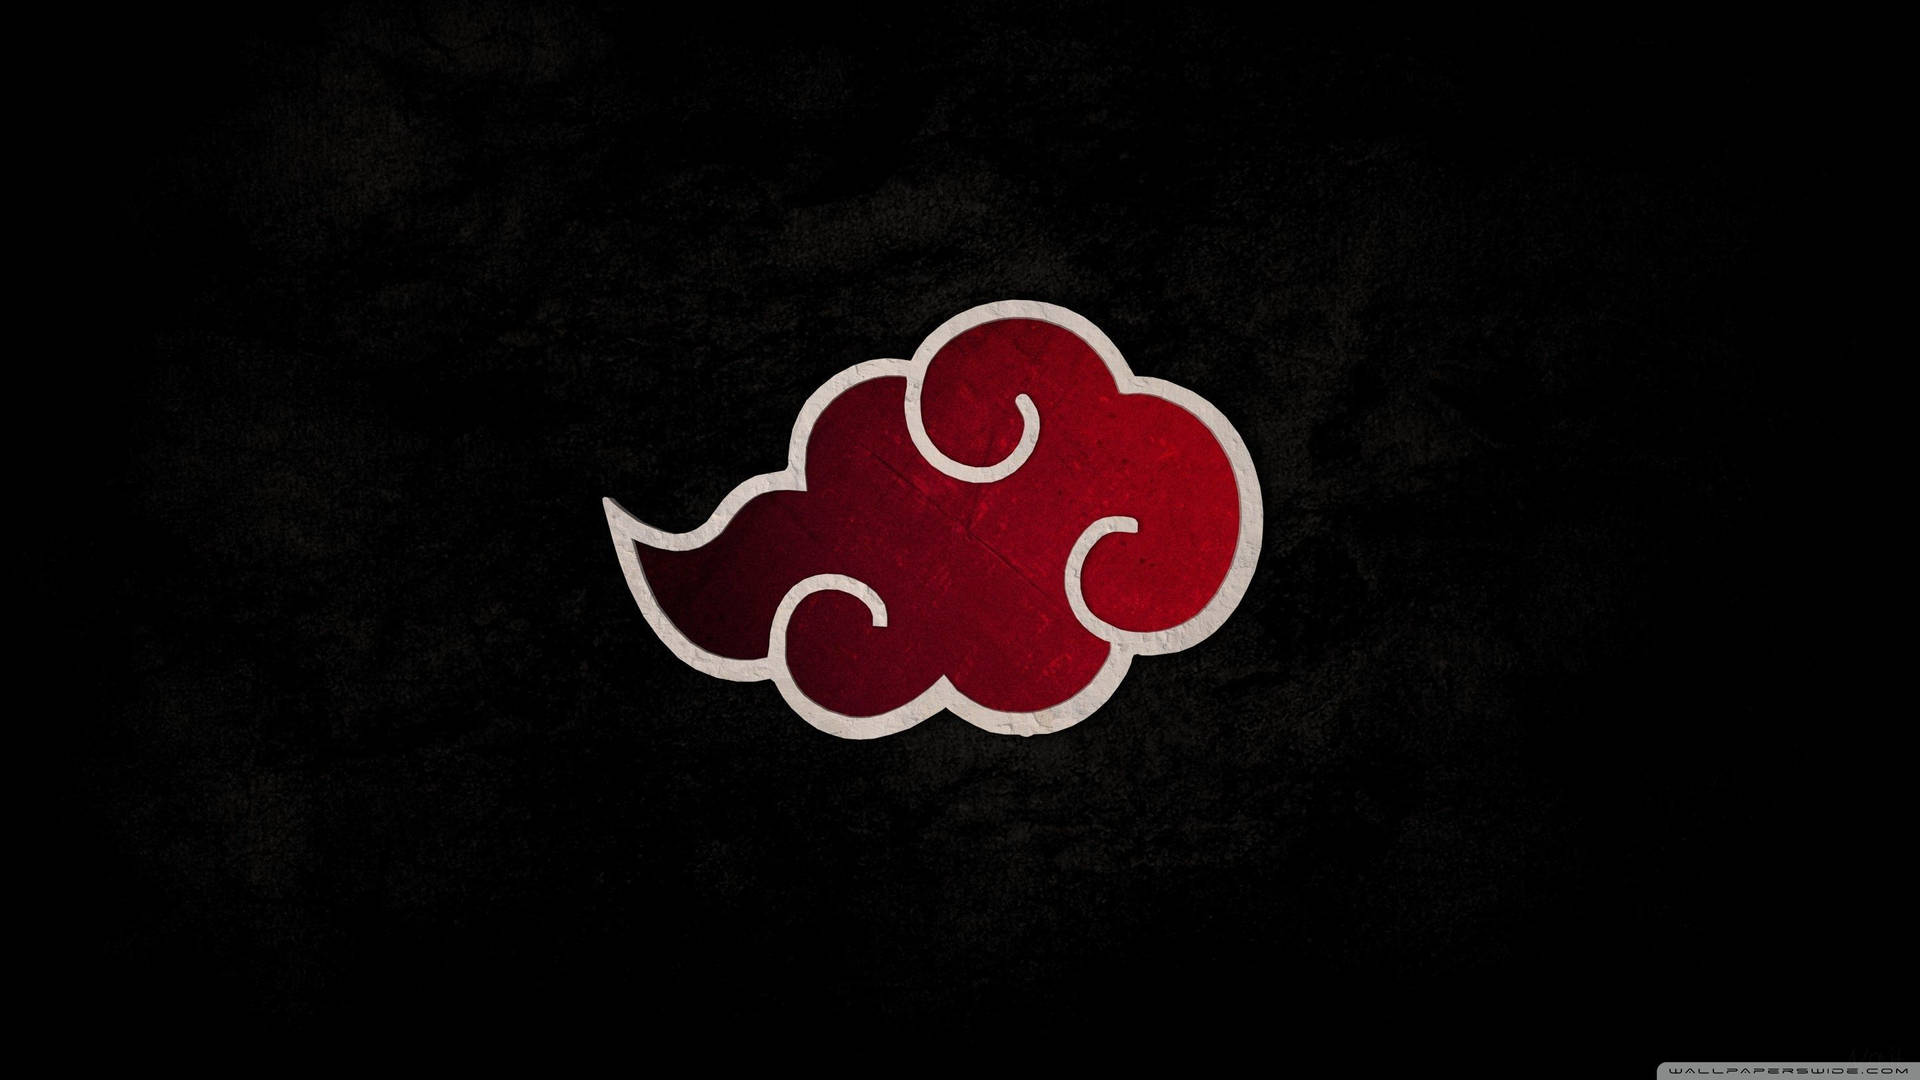 Caption: Intricate Red Cloud Symbol from Naruto Anime Series Wallpaper